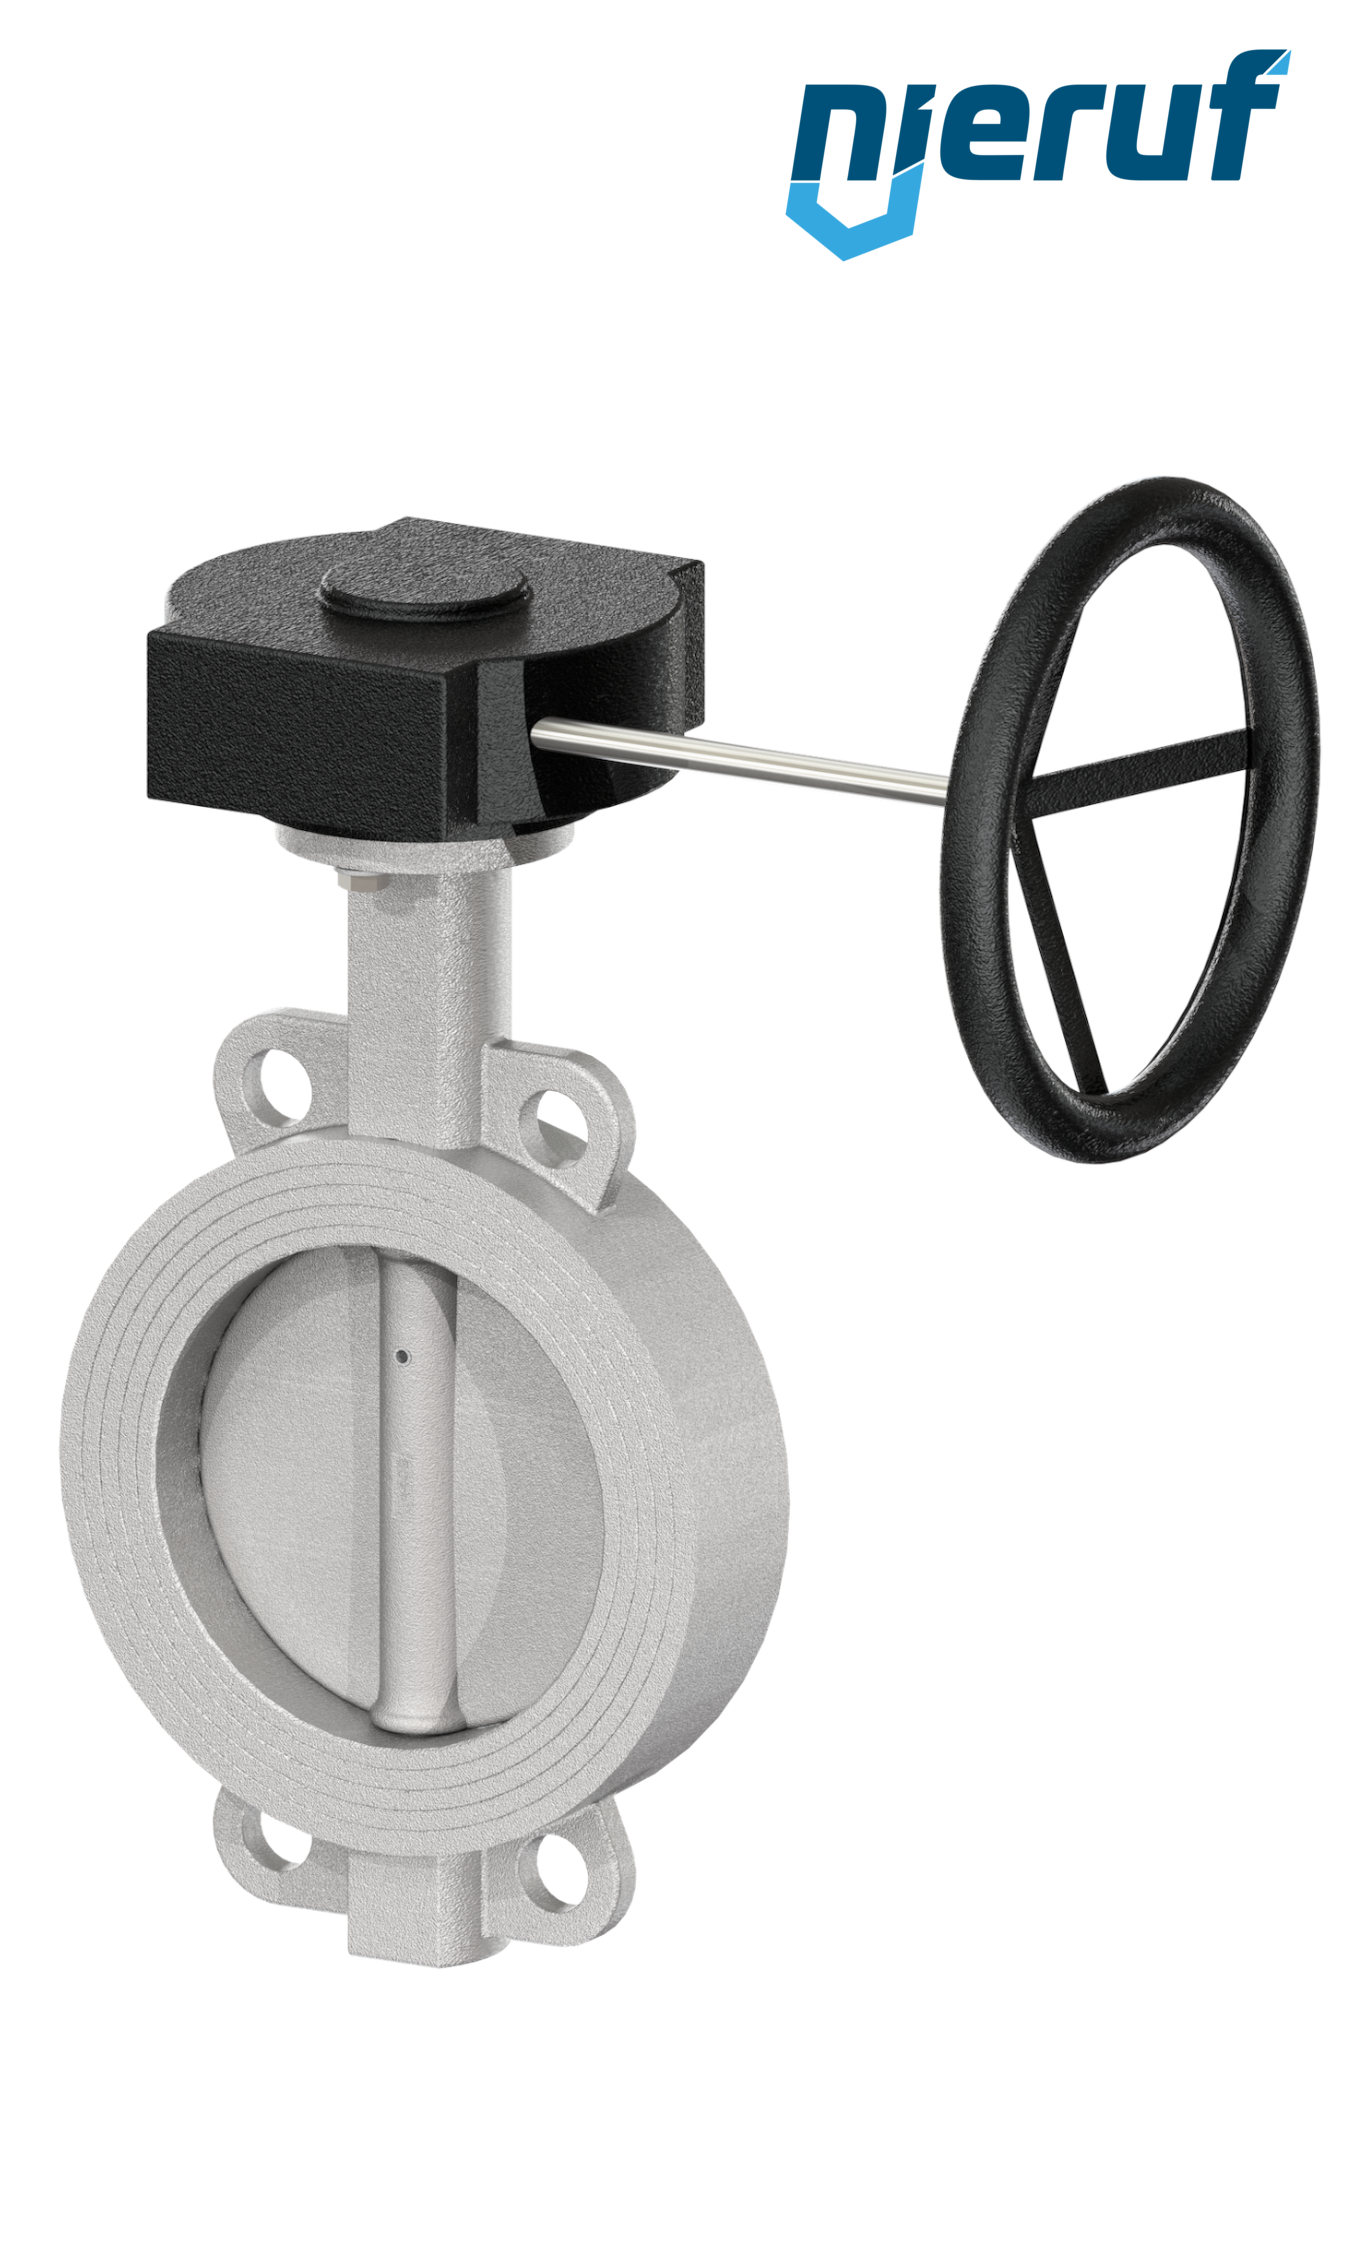 Butterfly-valve-stainless-steel DN 100 PN16 AK08 metall gearbox